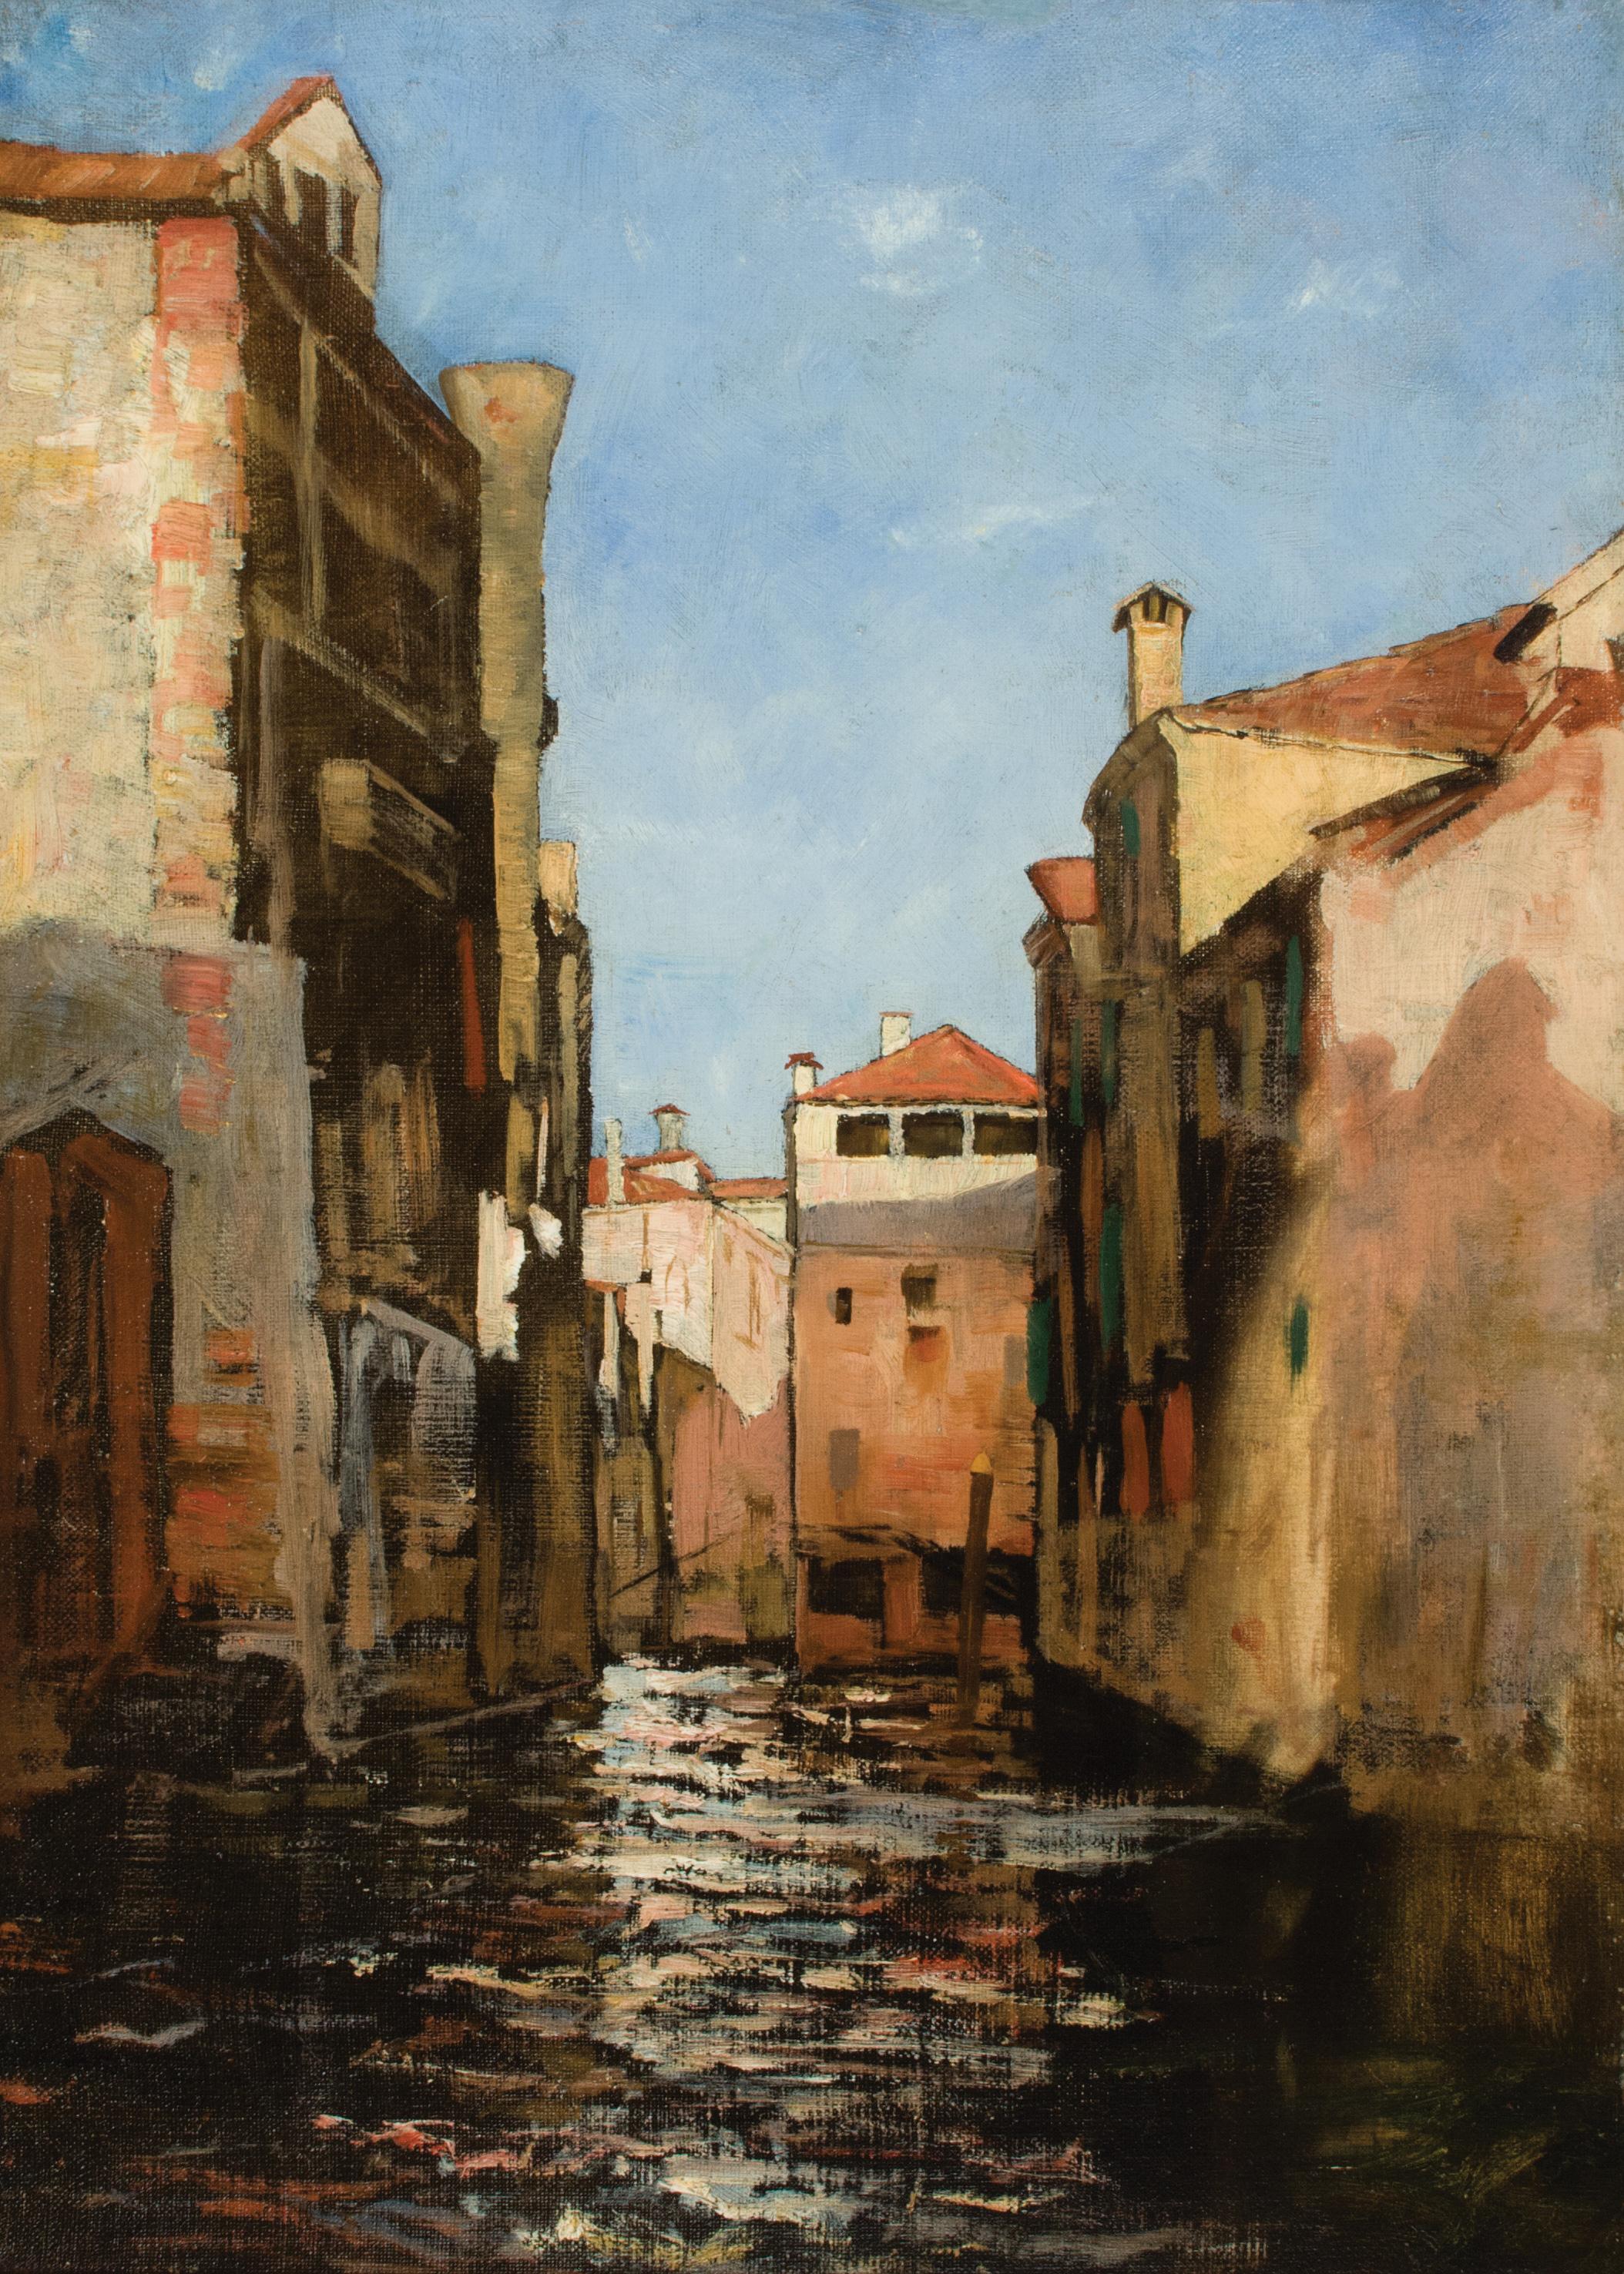 A Canal in Venice - Victorian Lansdscape - Painting by Benjamin Ferris Gilman